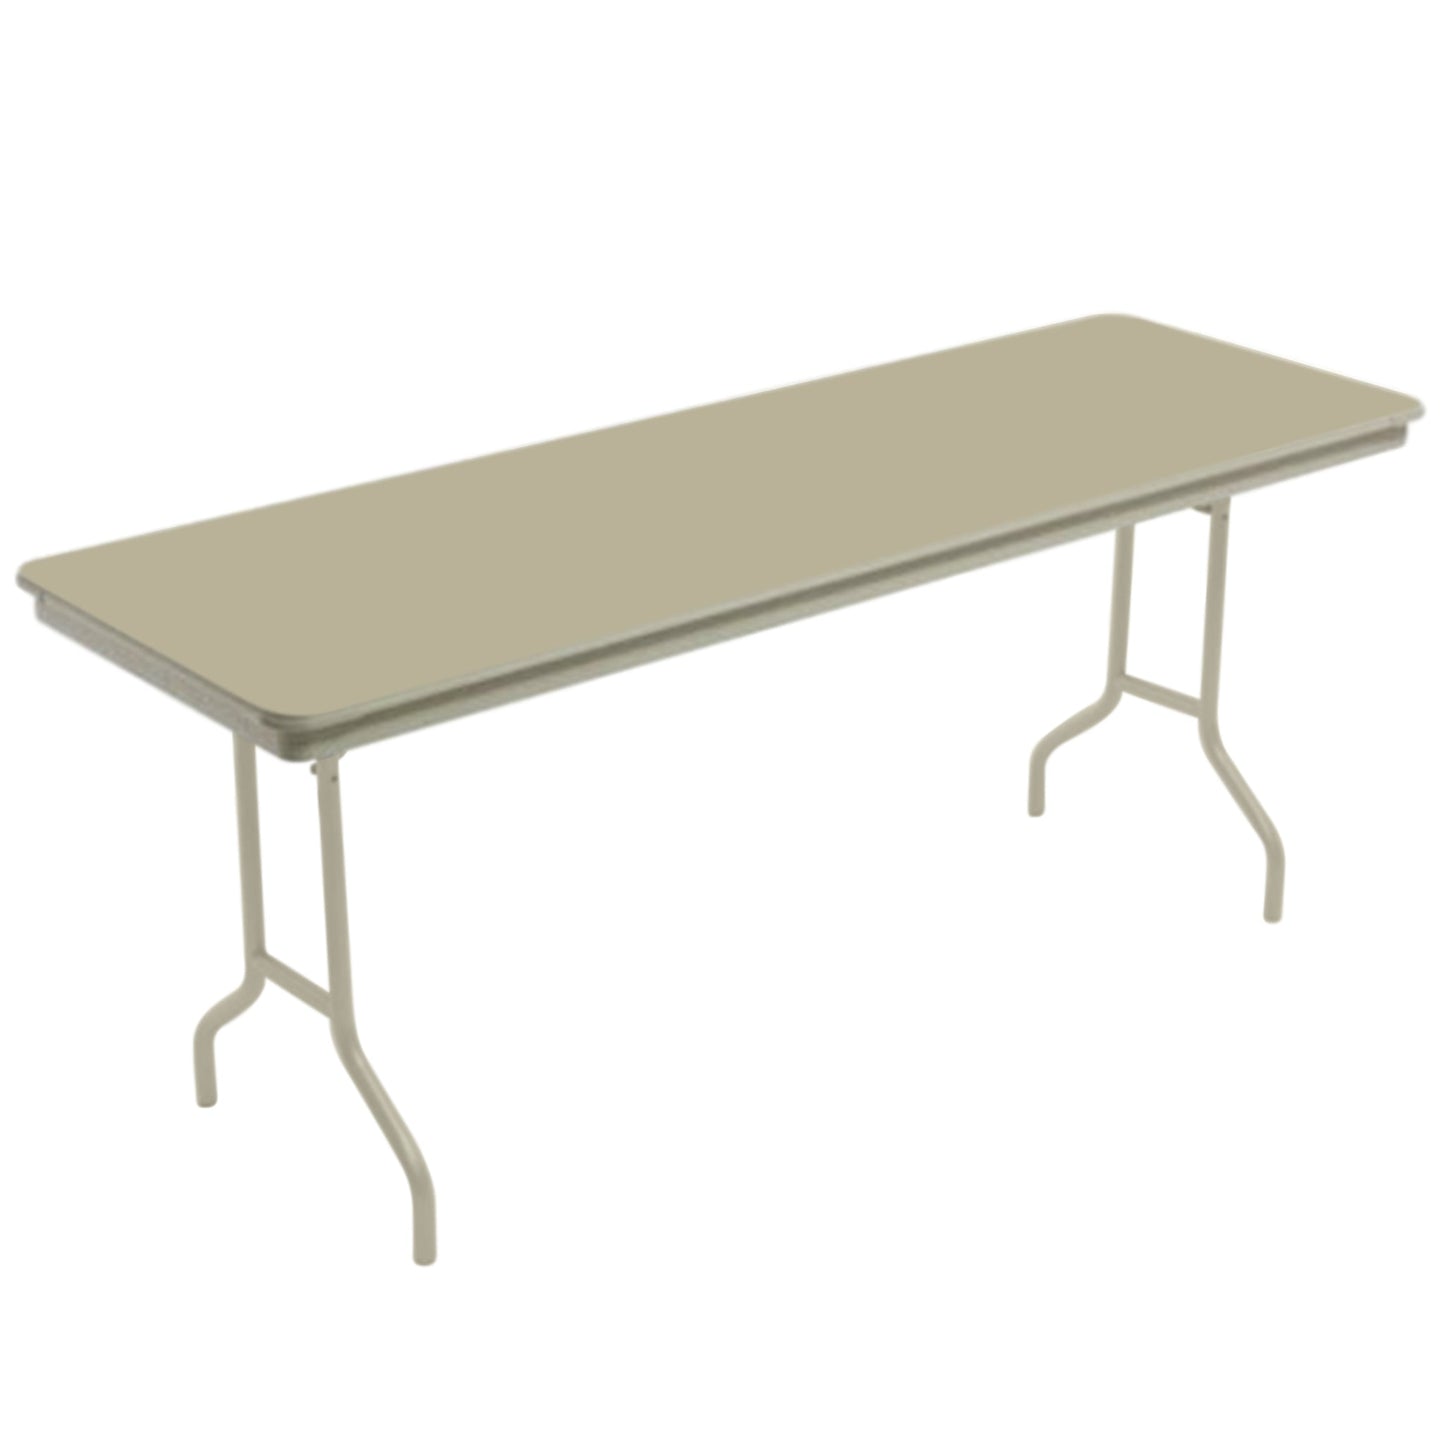 AmTab Dynalite Featherweight Heavy - Duty ABS Plastic Folding Table - Rectangle - 18"W x 60"L x 29"H (AmTab AMT - 185DL) - SchoolOutlet